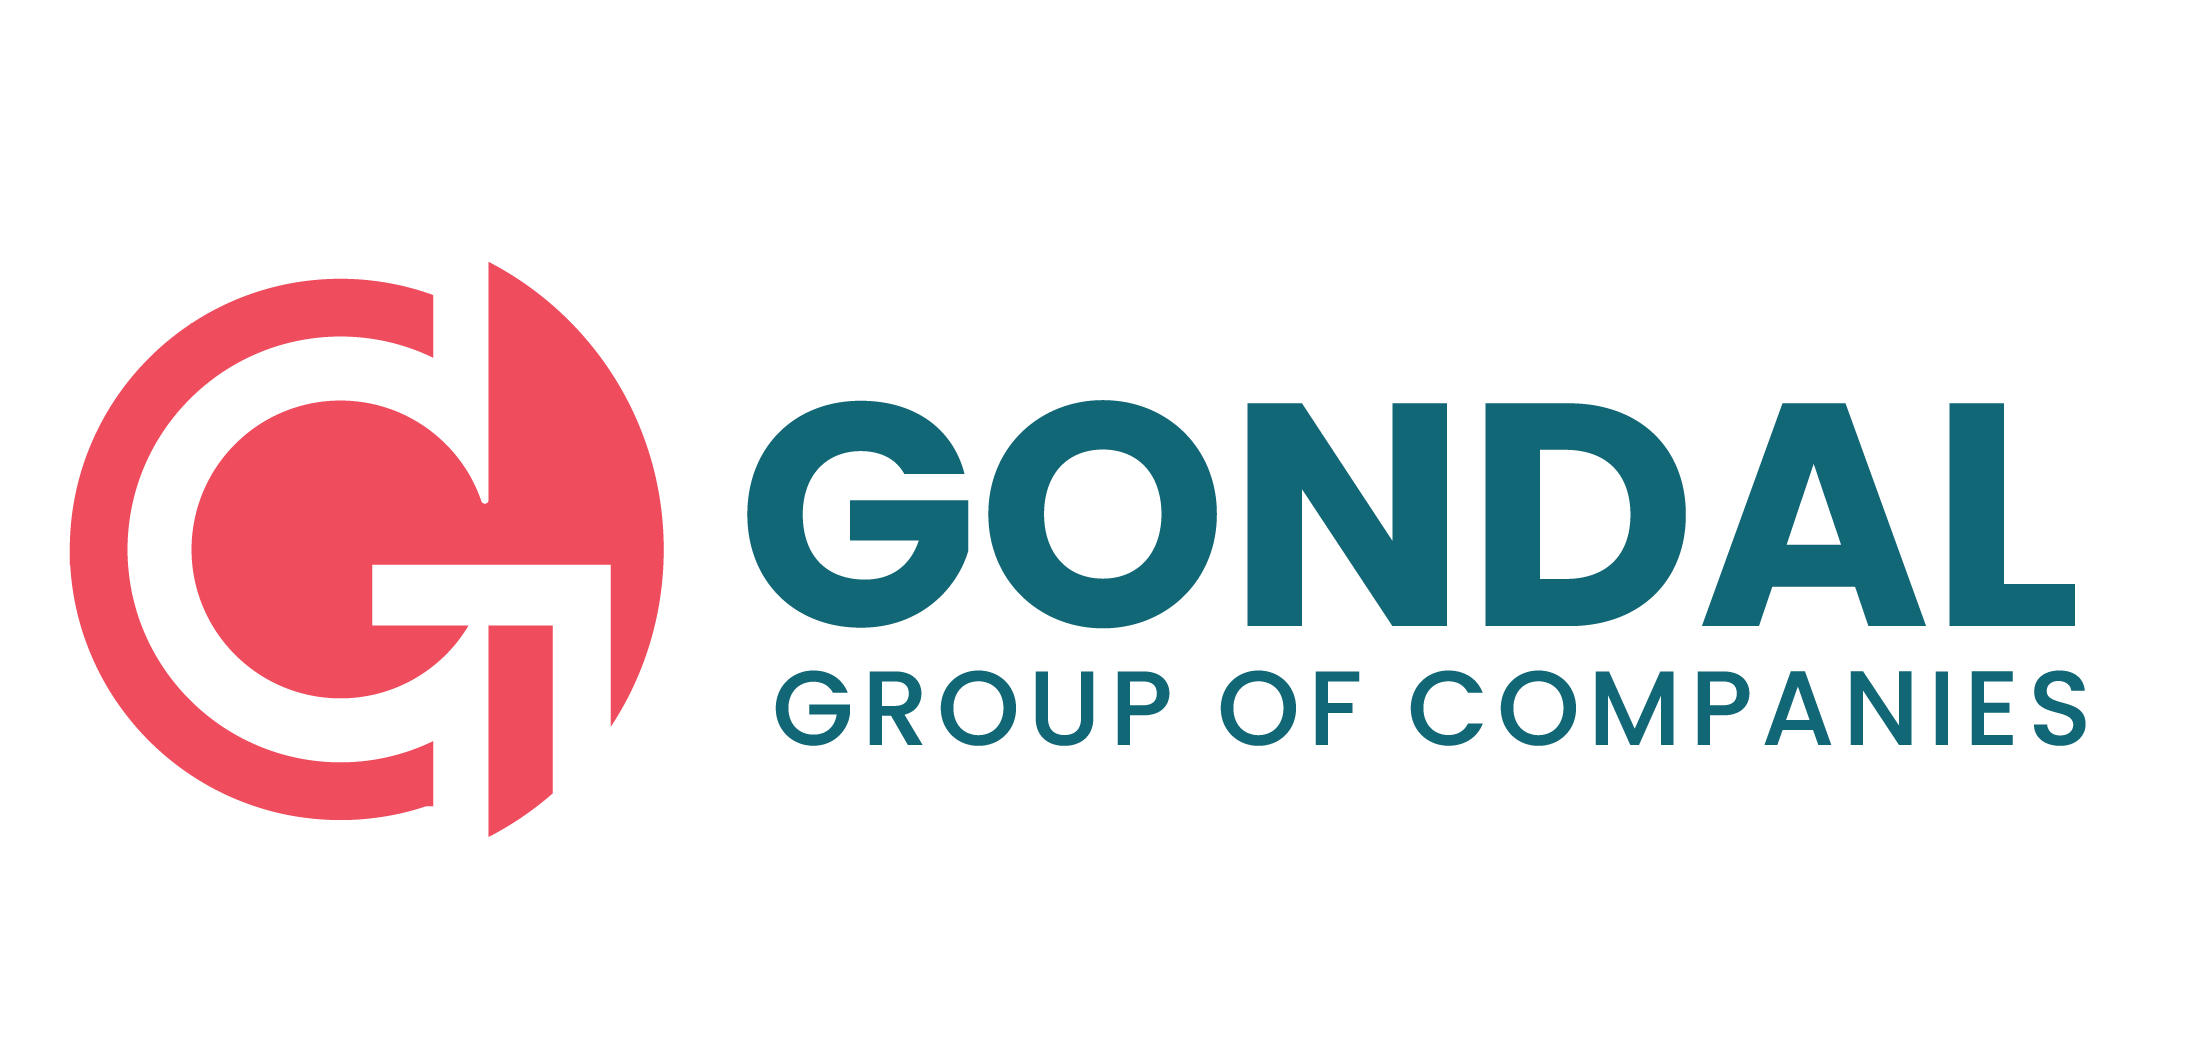 Gondal group of companies